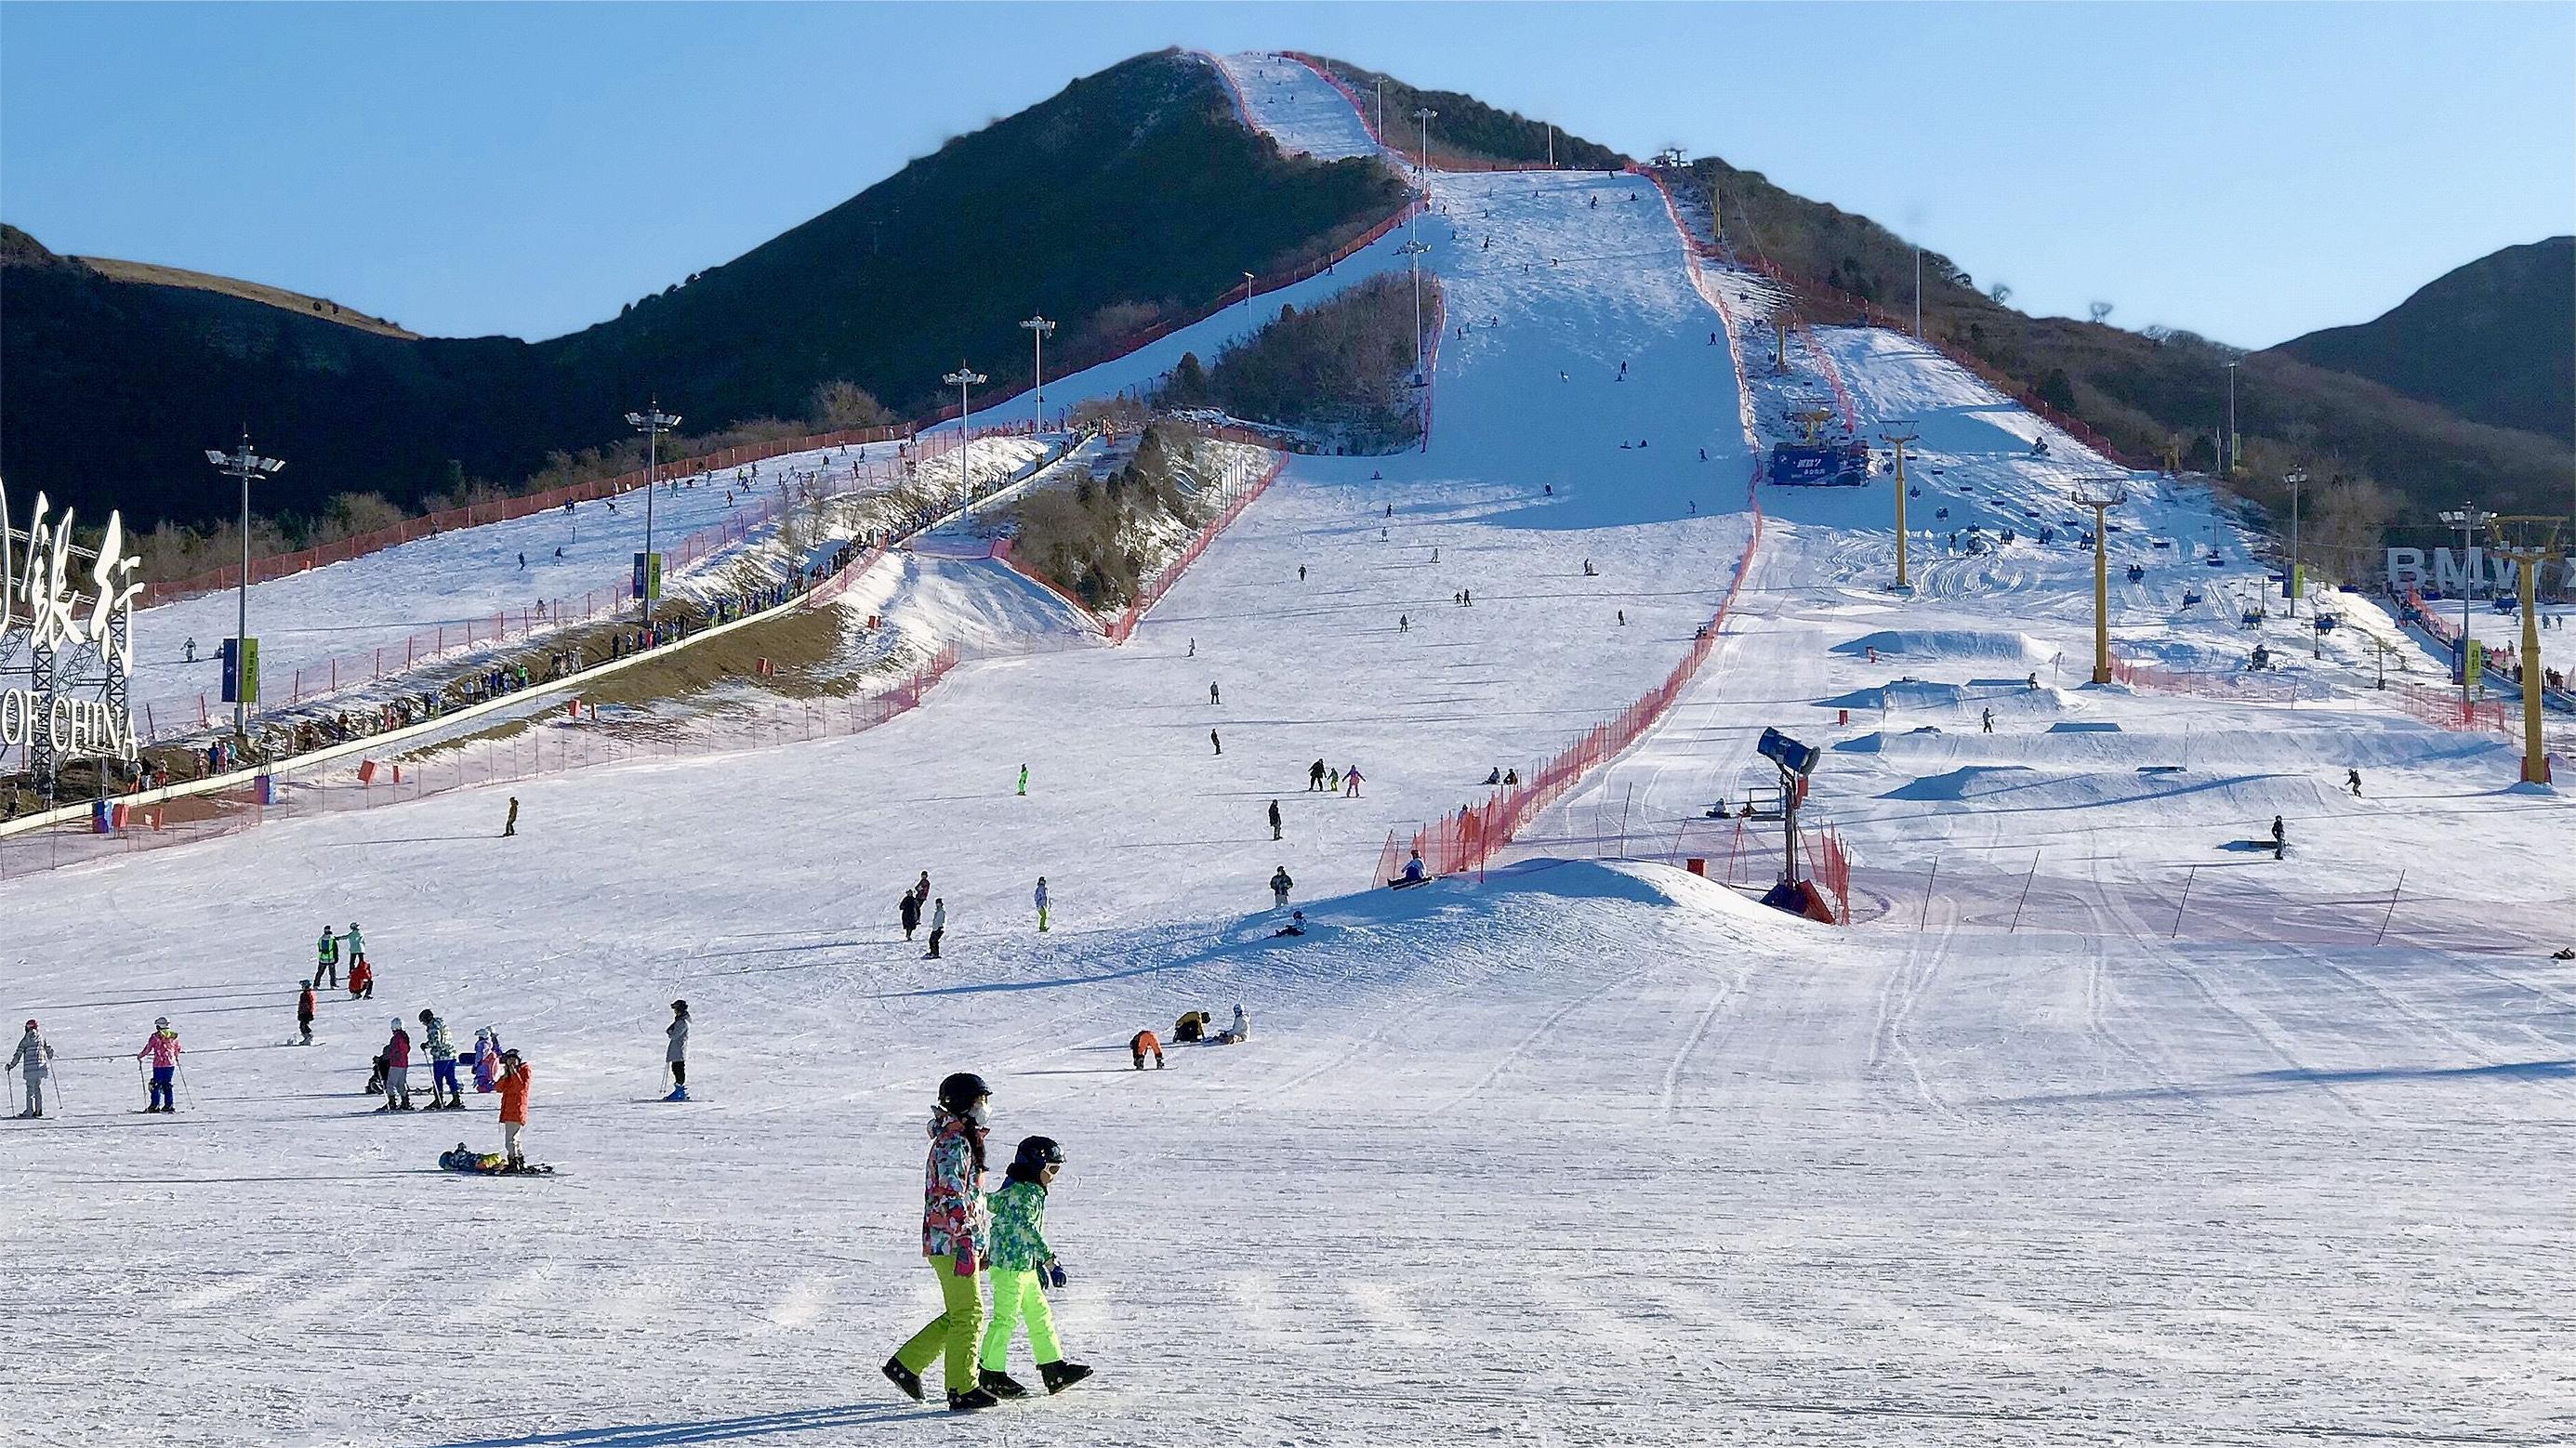 Resort in Beijing sees renewed passion for ice, snow sports